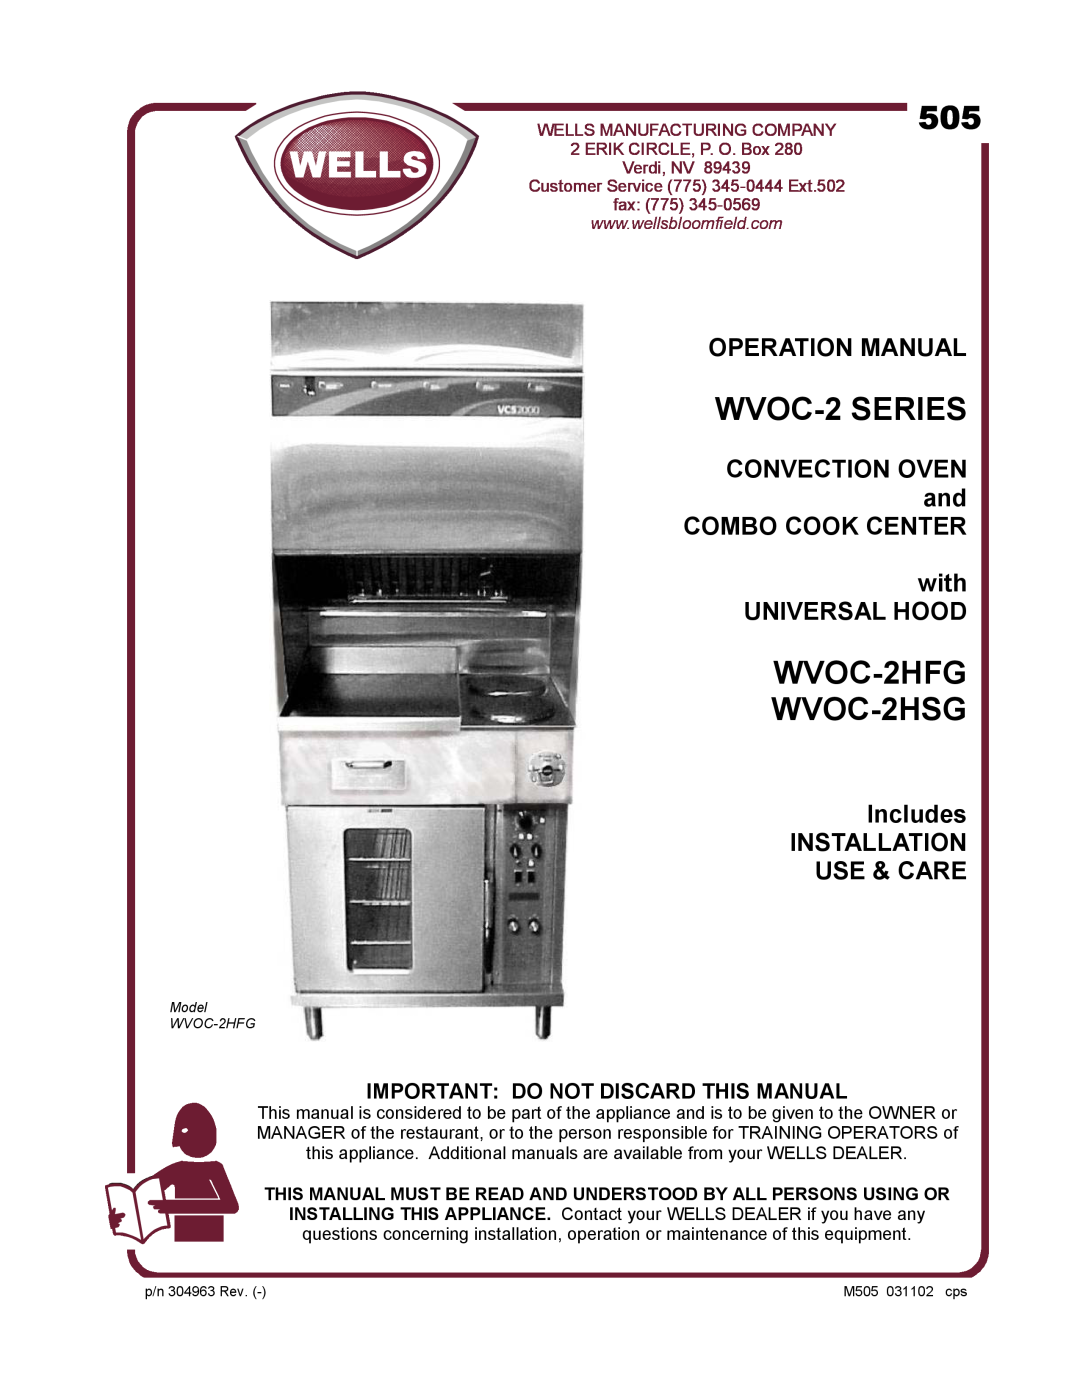 Bloomfield WVOC-2HFG operation manual COMBO COOK CENTER with UNIVERSAL HOOD, Includes INSTALLATION USE & CARE, Verdi, NV 